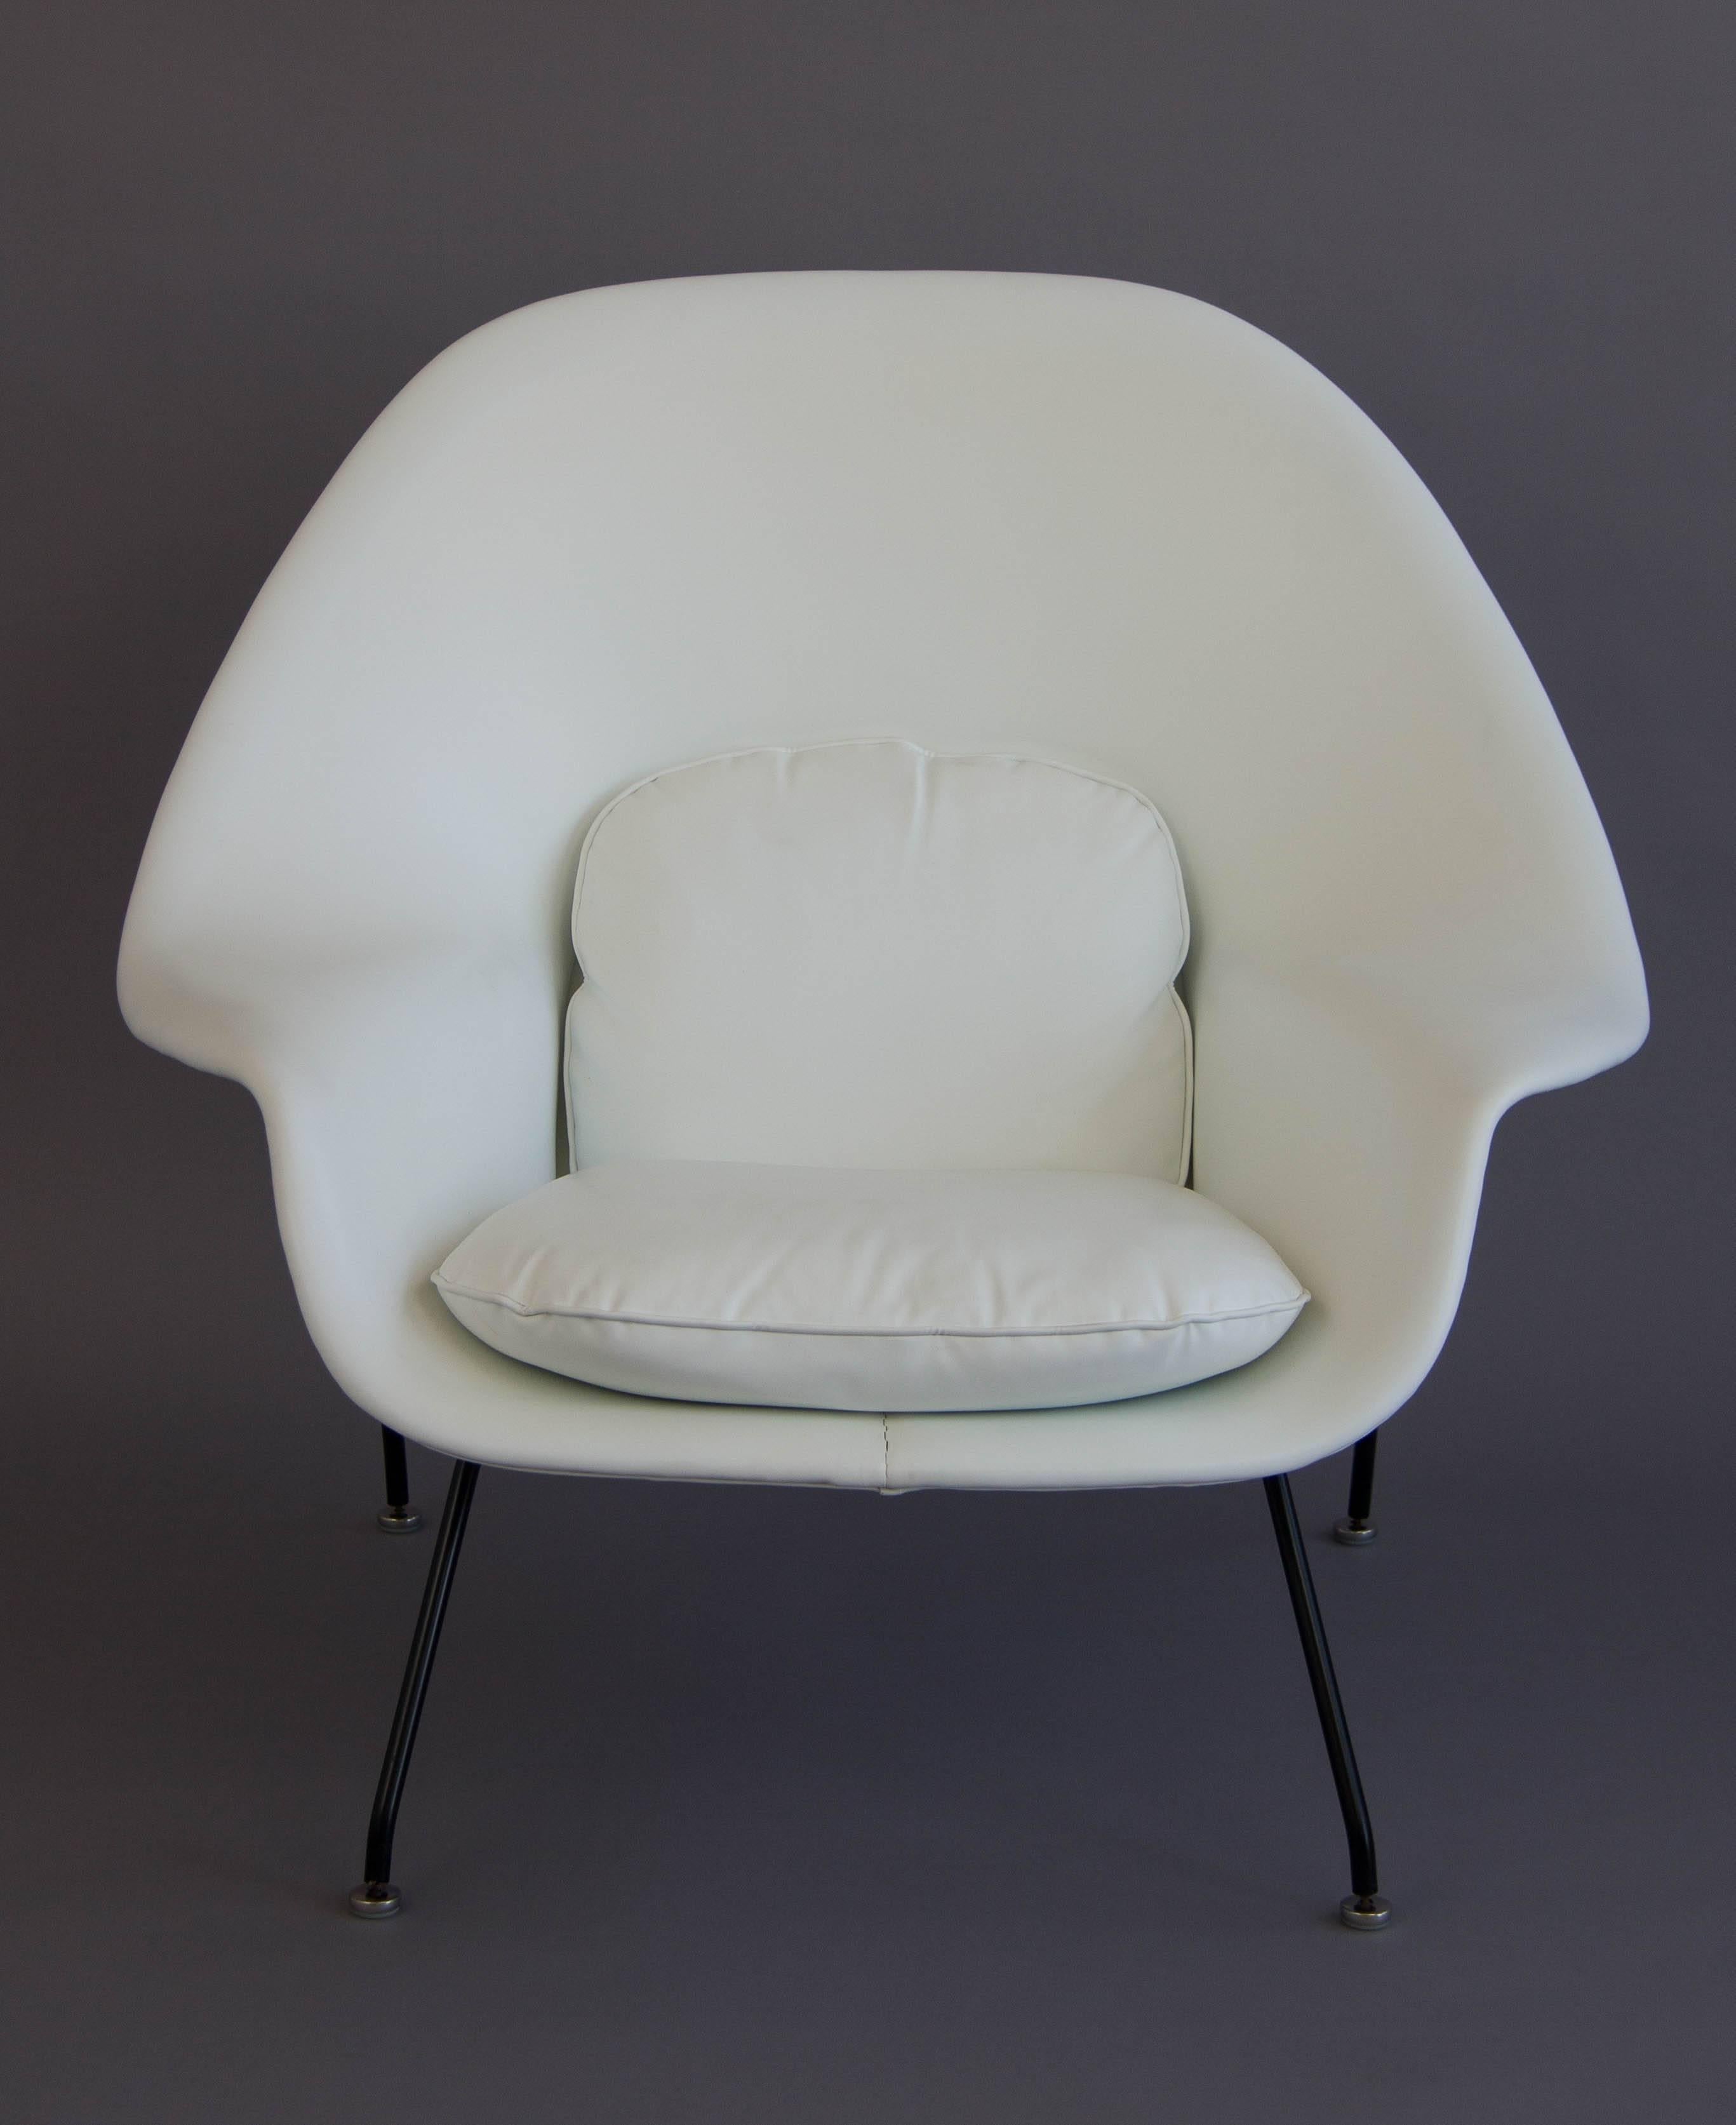 American Eero Saarinen White Womb Chair and Ottoman for Knoll